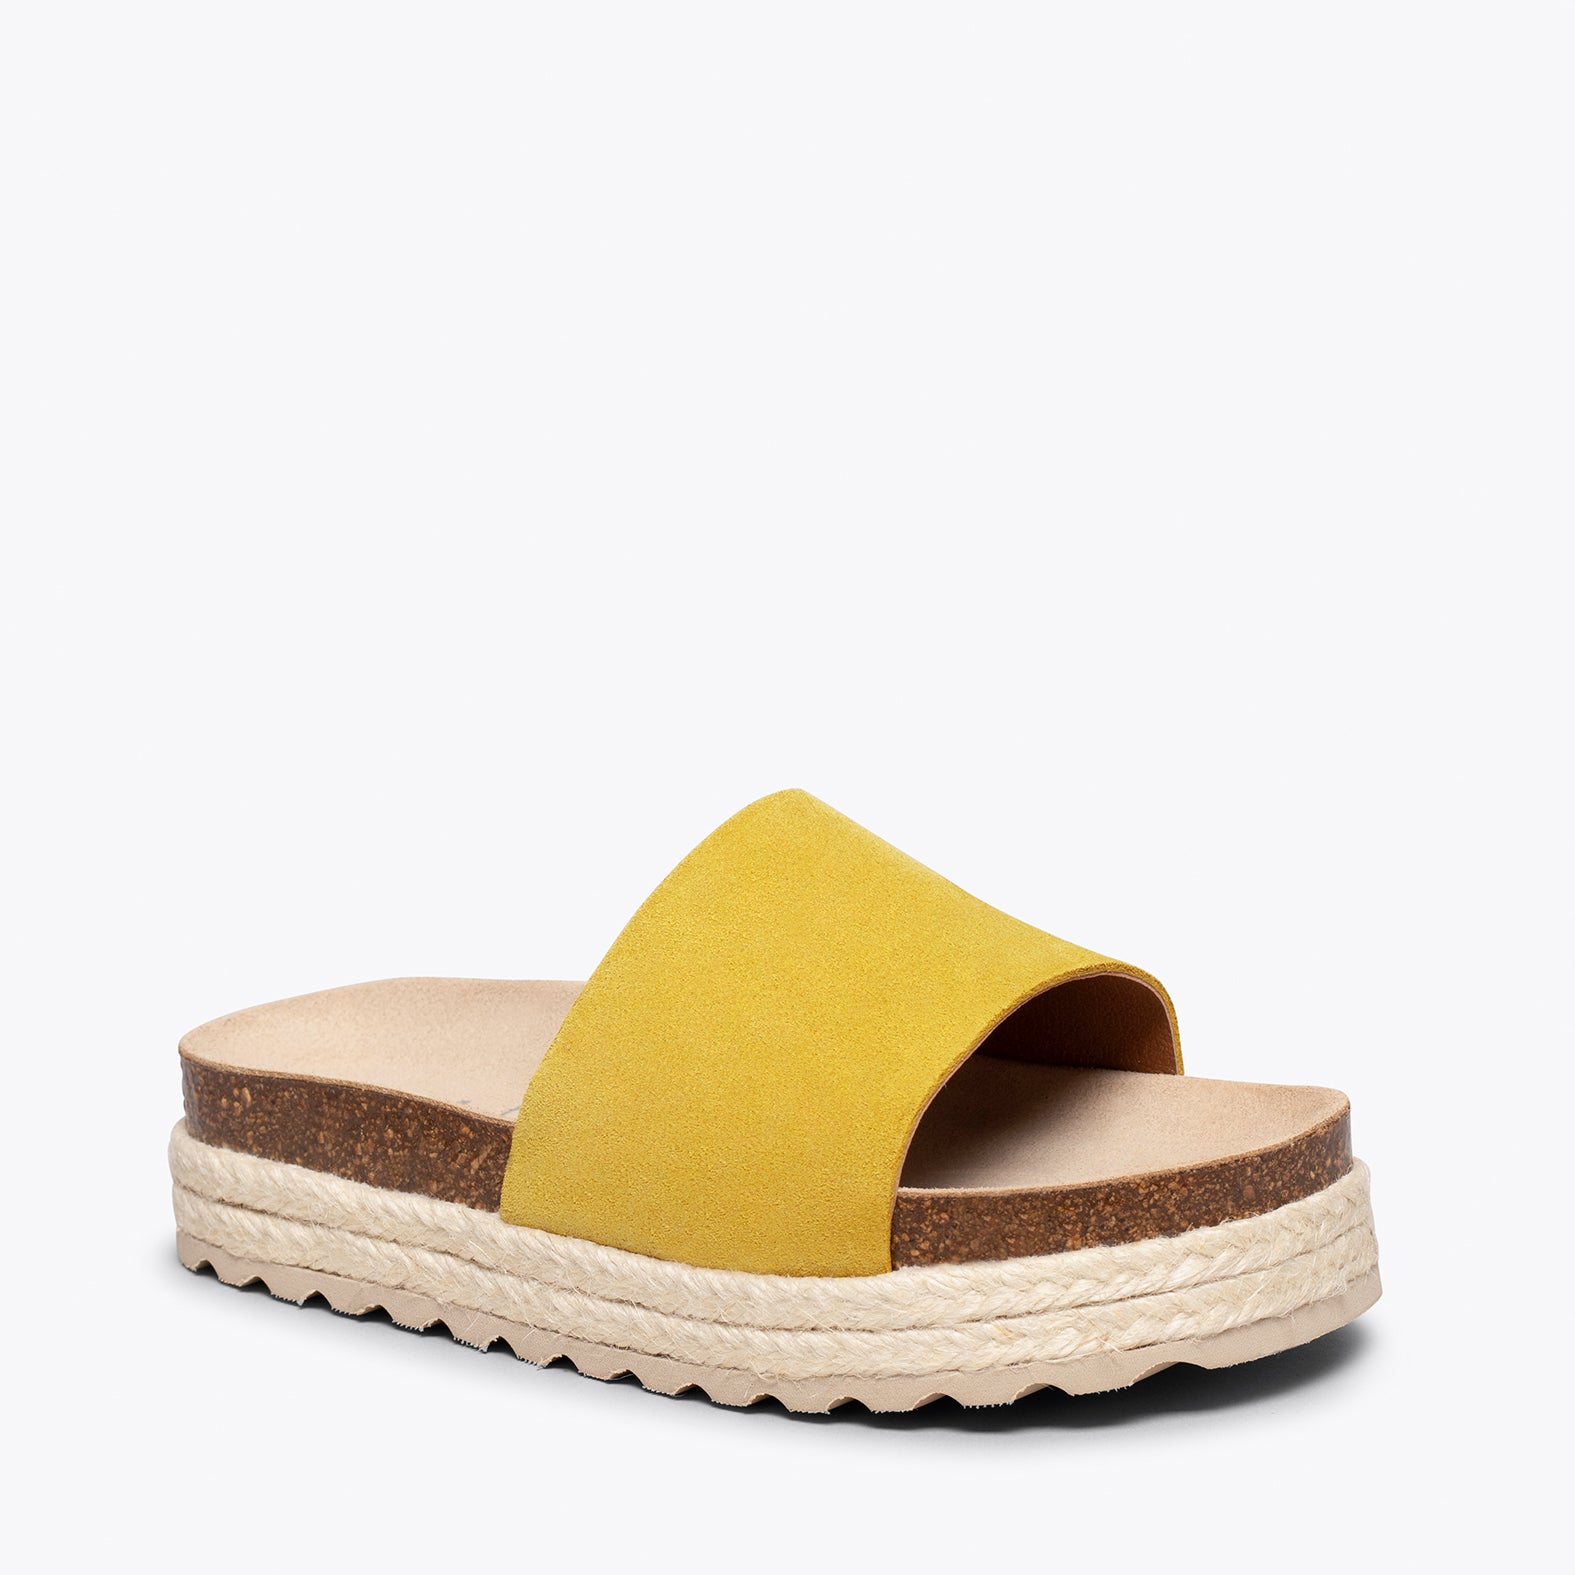 STRAWBERRY – YELLOW flat sandals for girls